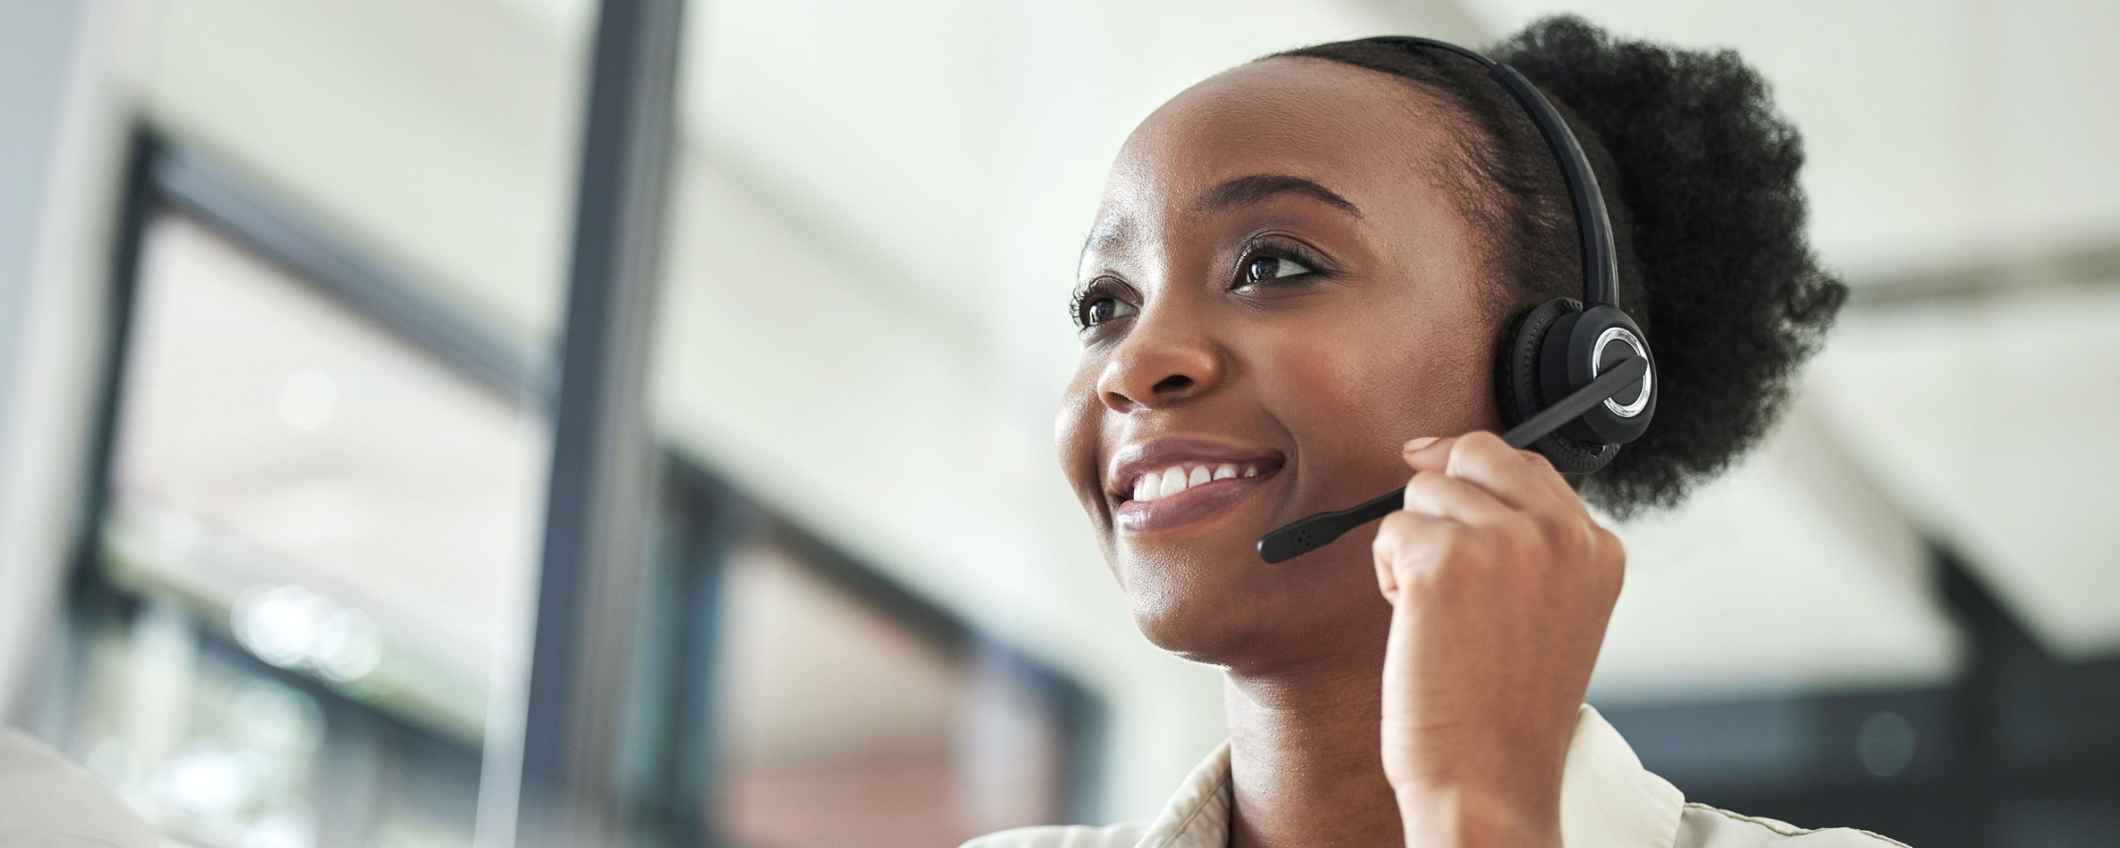 Black woman, call centre on phone with headset.